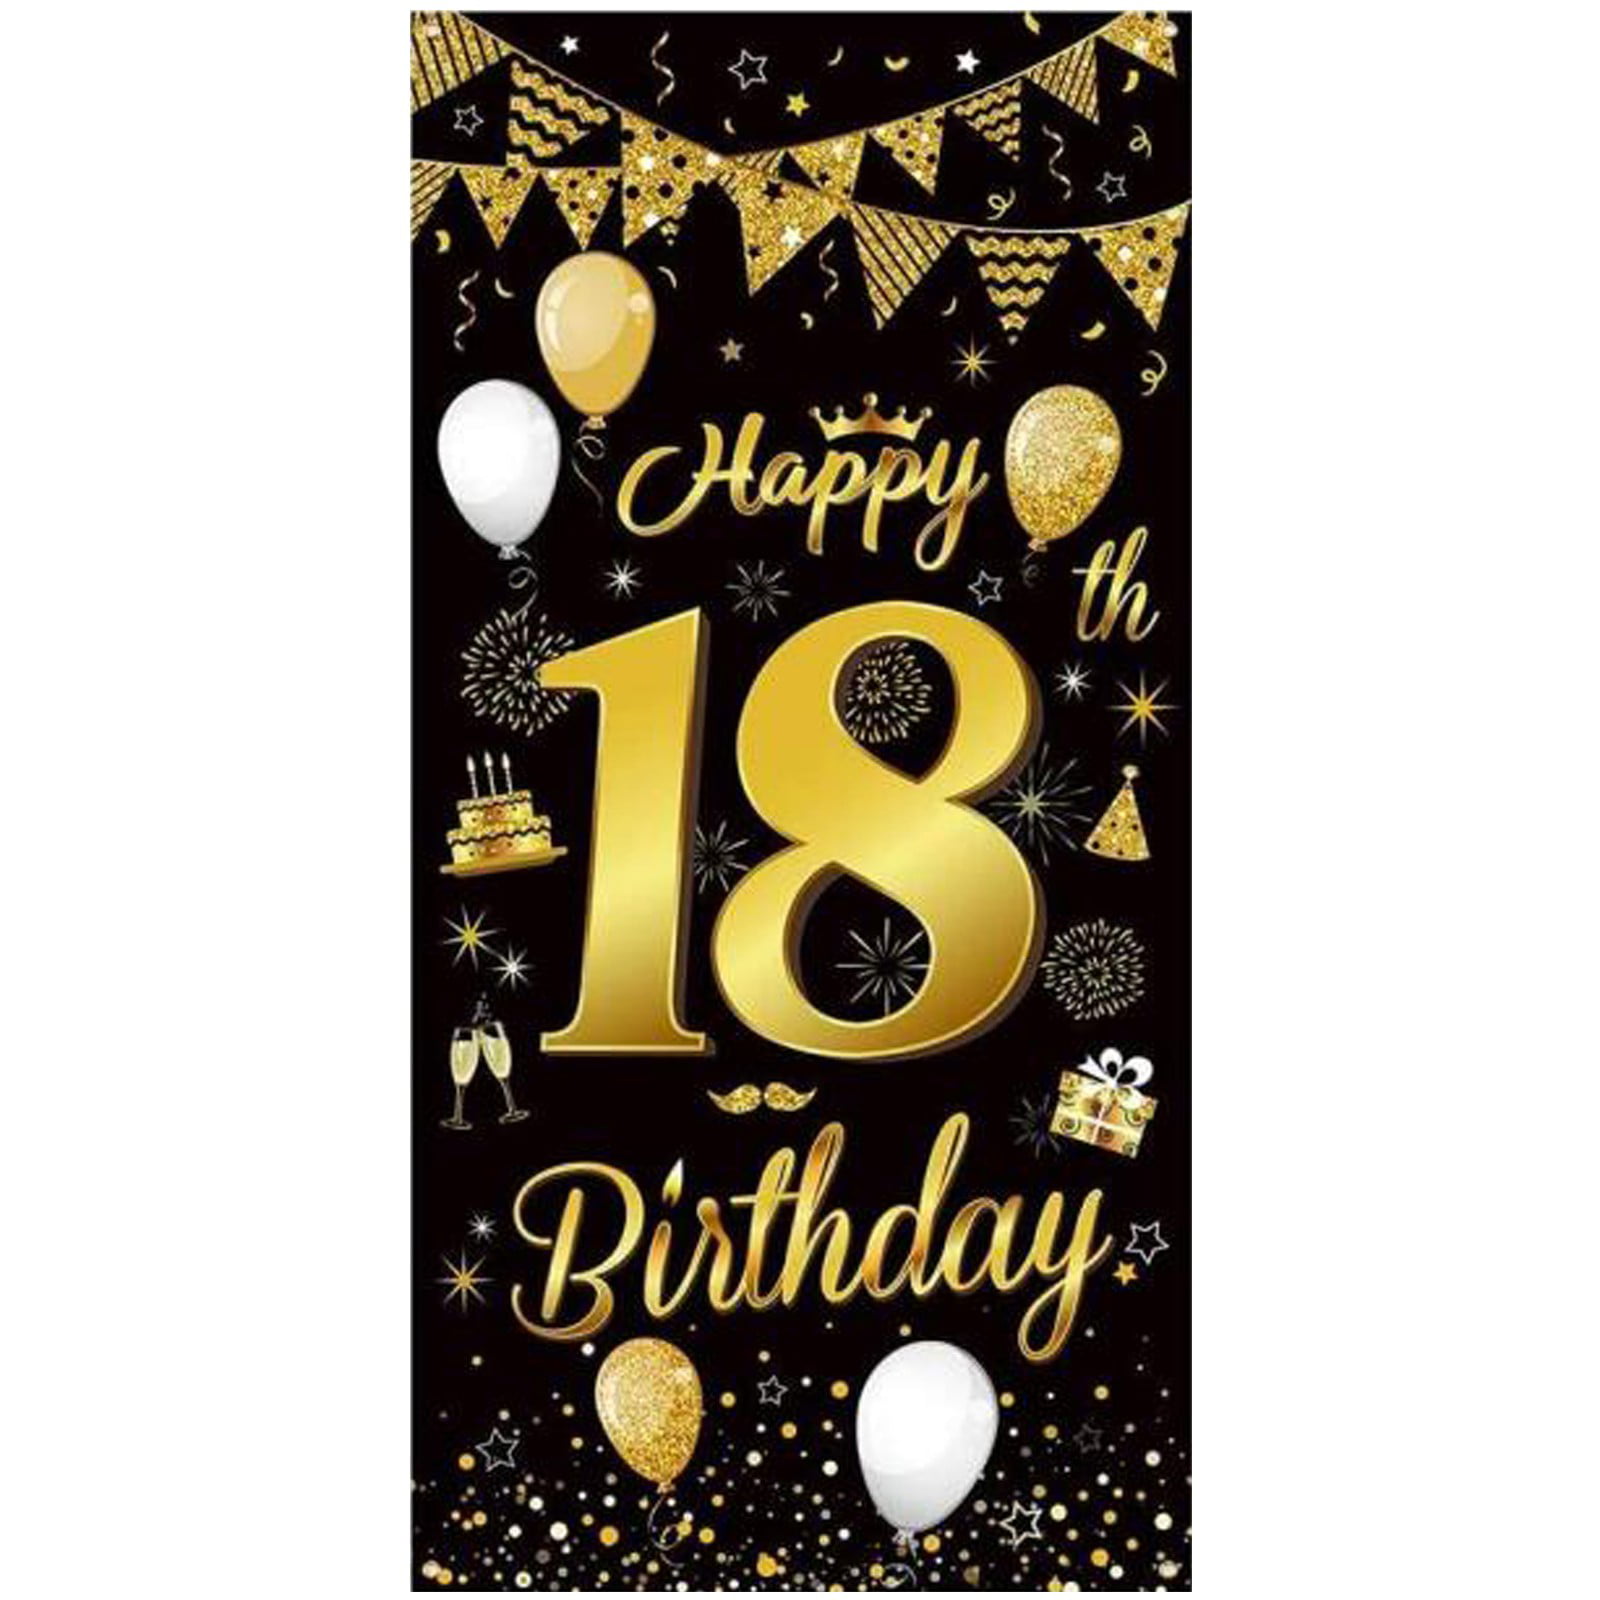 Details about   Black Glittery Happy Birthday Sign Banner for Birthday Party Decorations,Kids...